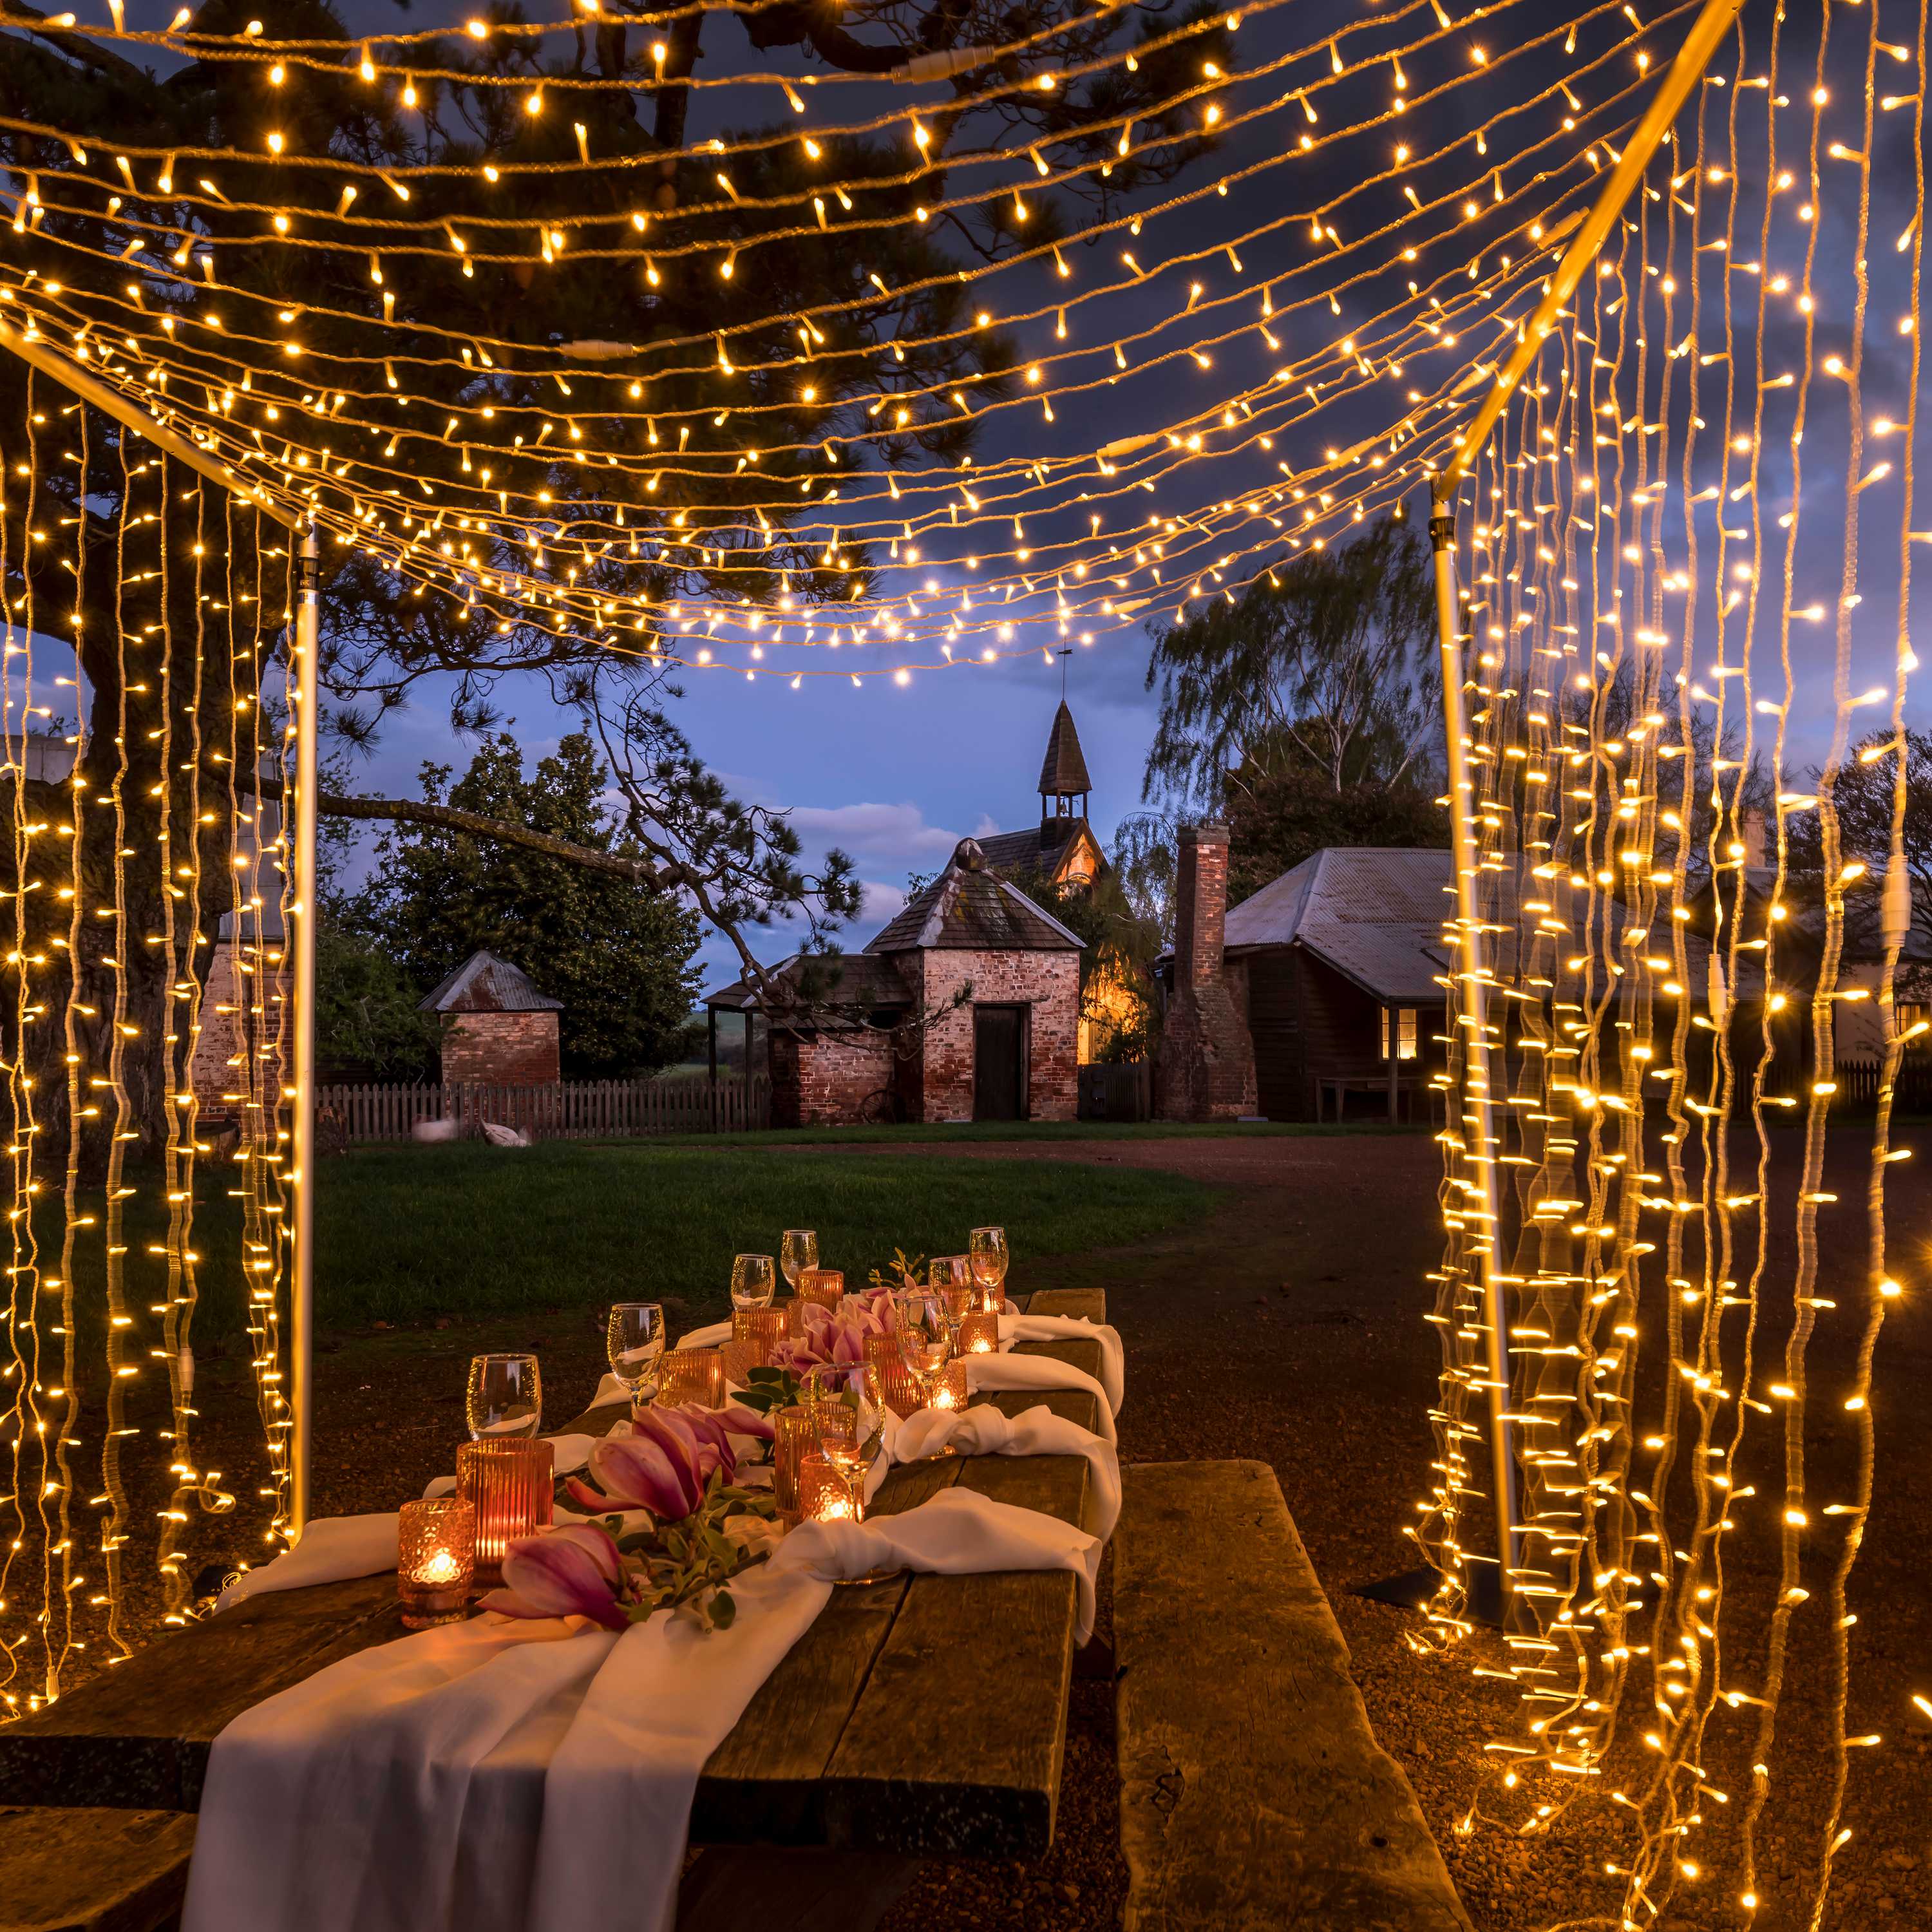 A frame of fairy lights drape over an outdoor table set with wine glasses, flowers and table linen. Farm buildings line the roadway in the background and the sky is starting to darken. Photo: Rob Burnett.